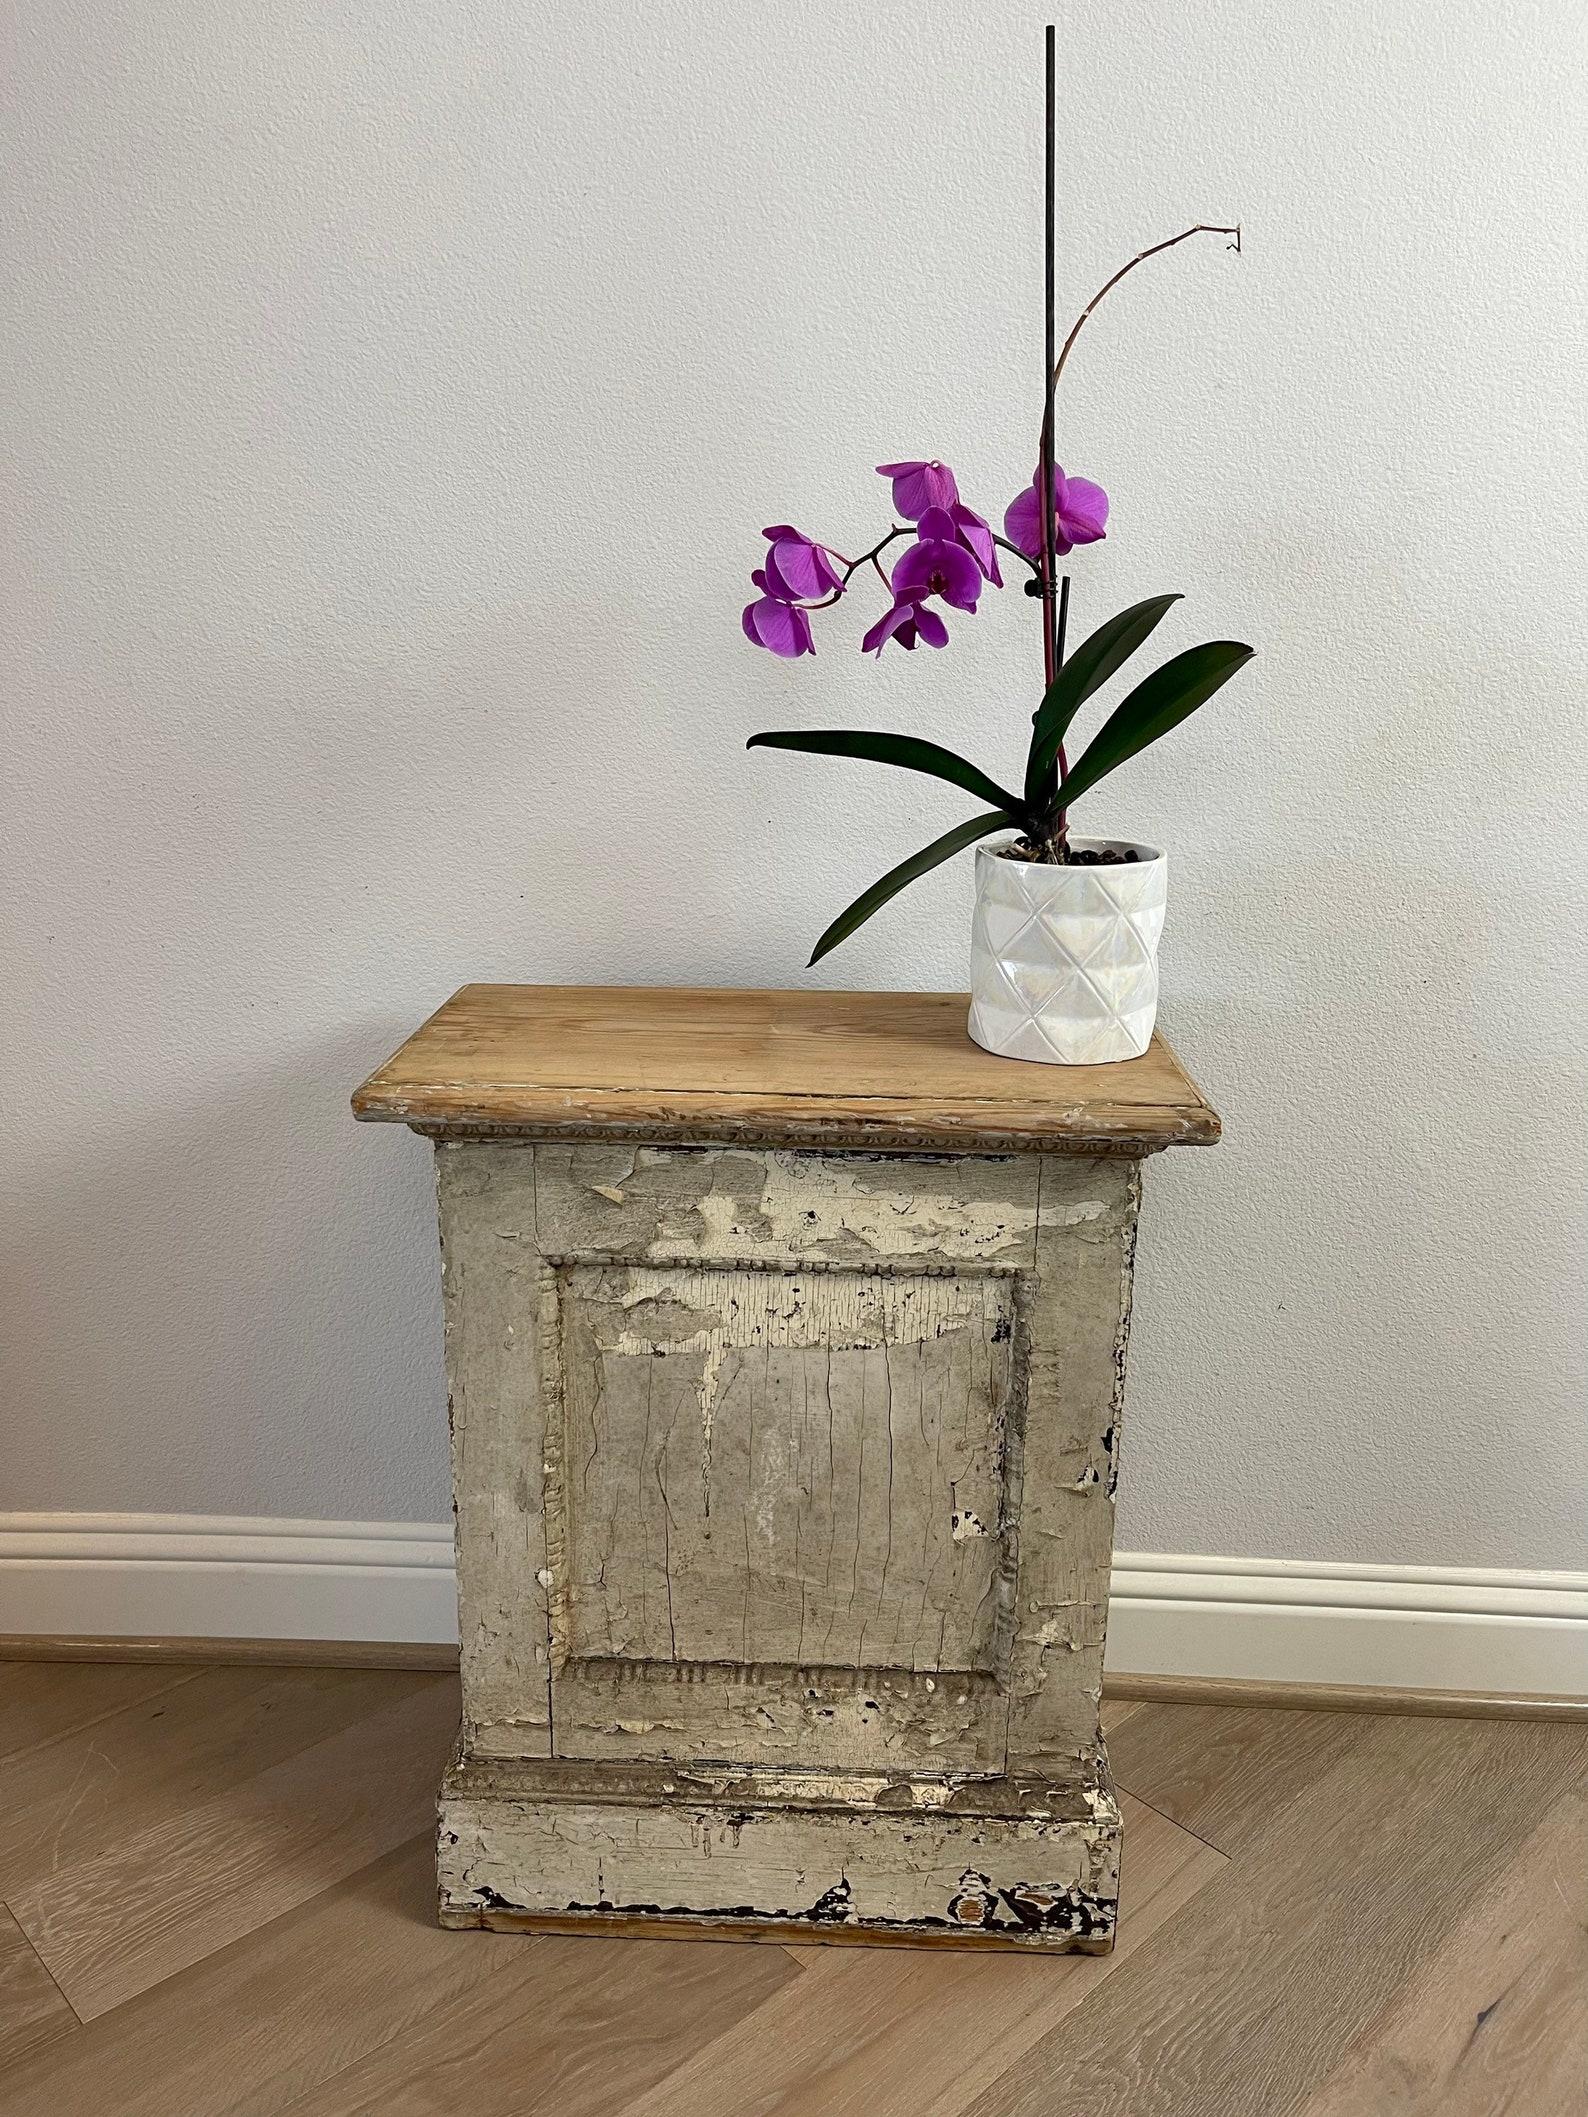 A most distinctive Swedish Country hand painted wooden stand. Hand-crafted of solid pine, most likely Gustavian Period (1772–1809), finished on all sides, showcasing layers of the original paint finish, now with heavily worn, distressed, weathered